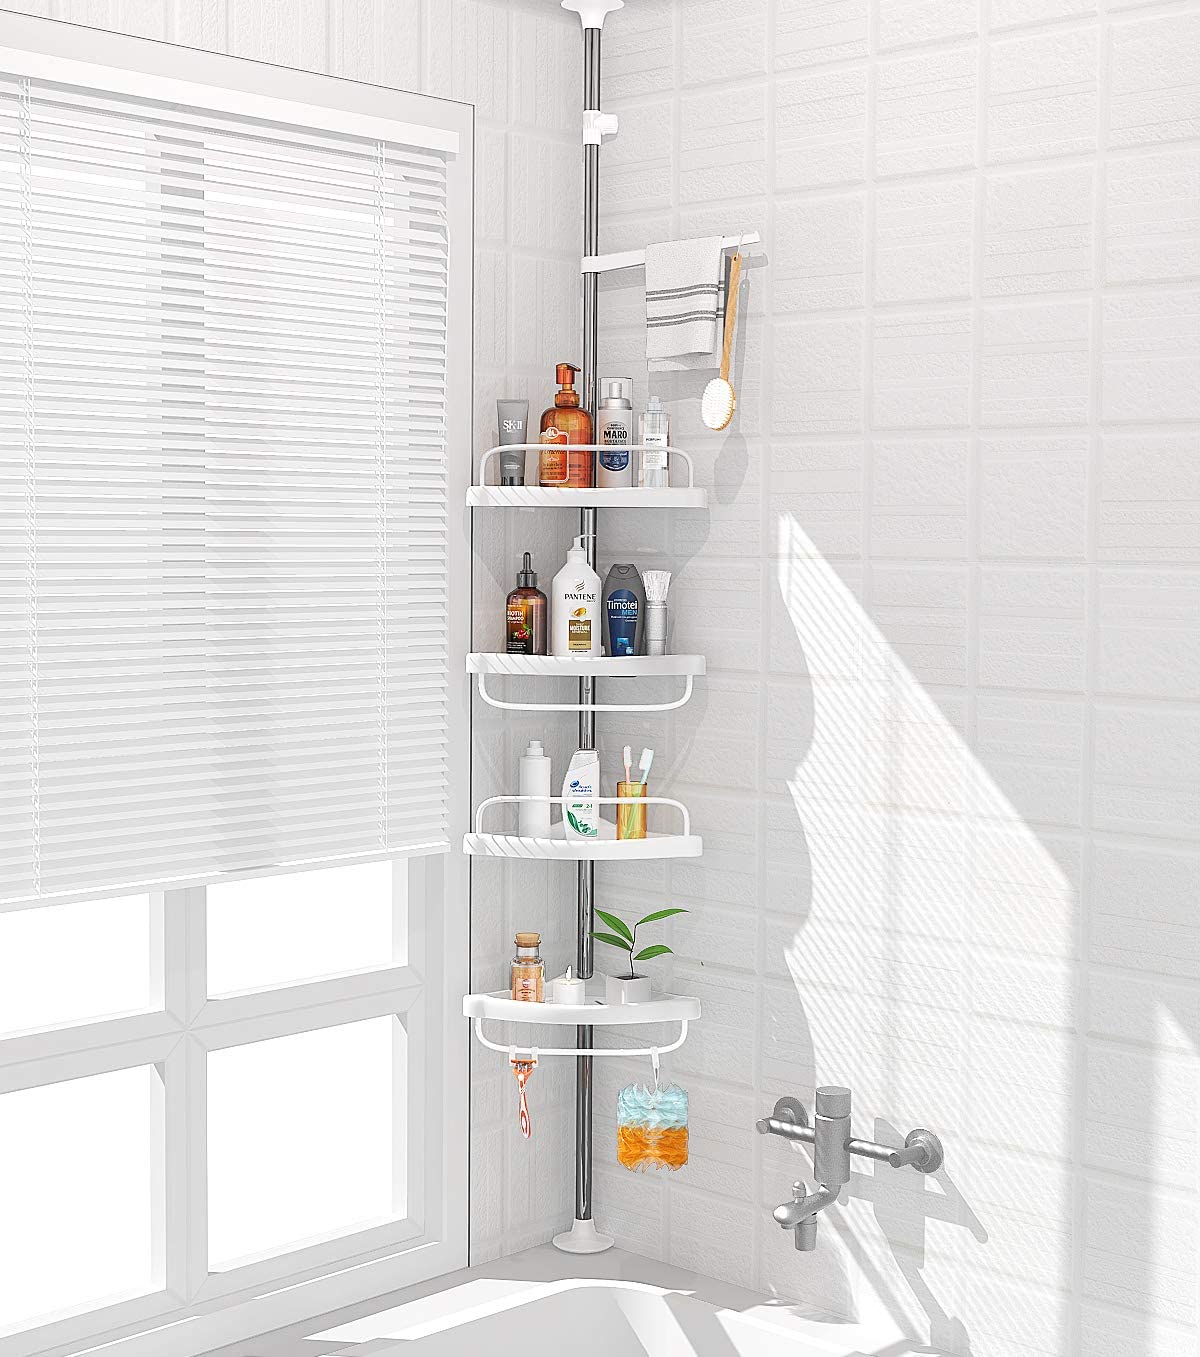 https://www.wideopencountry.com/wp-content/uploads/sites/4/2021/04/ADOVEL-4-Layer-Corner-Shower-Caddy-Adjustable-Shower-Shelf-Constant-Tension-Stainless-Steel-Pole-Organizer-Rustproof-3.3-to-9.8ft.jpg?resize=1200%2C1357